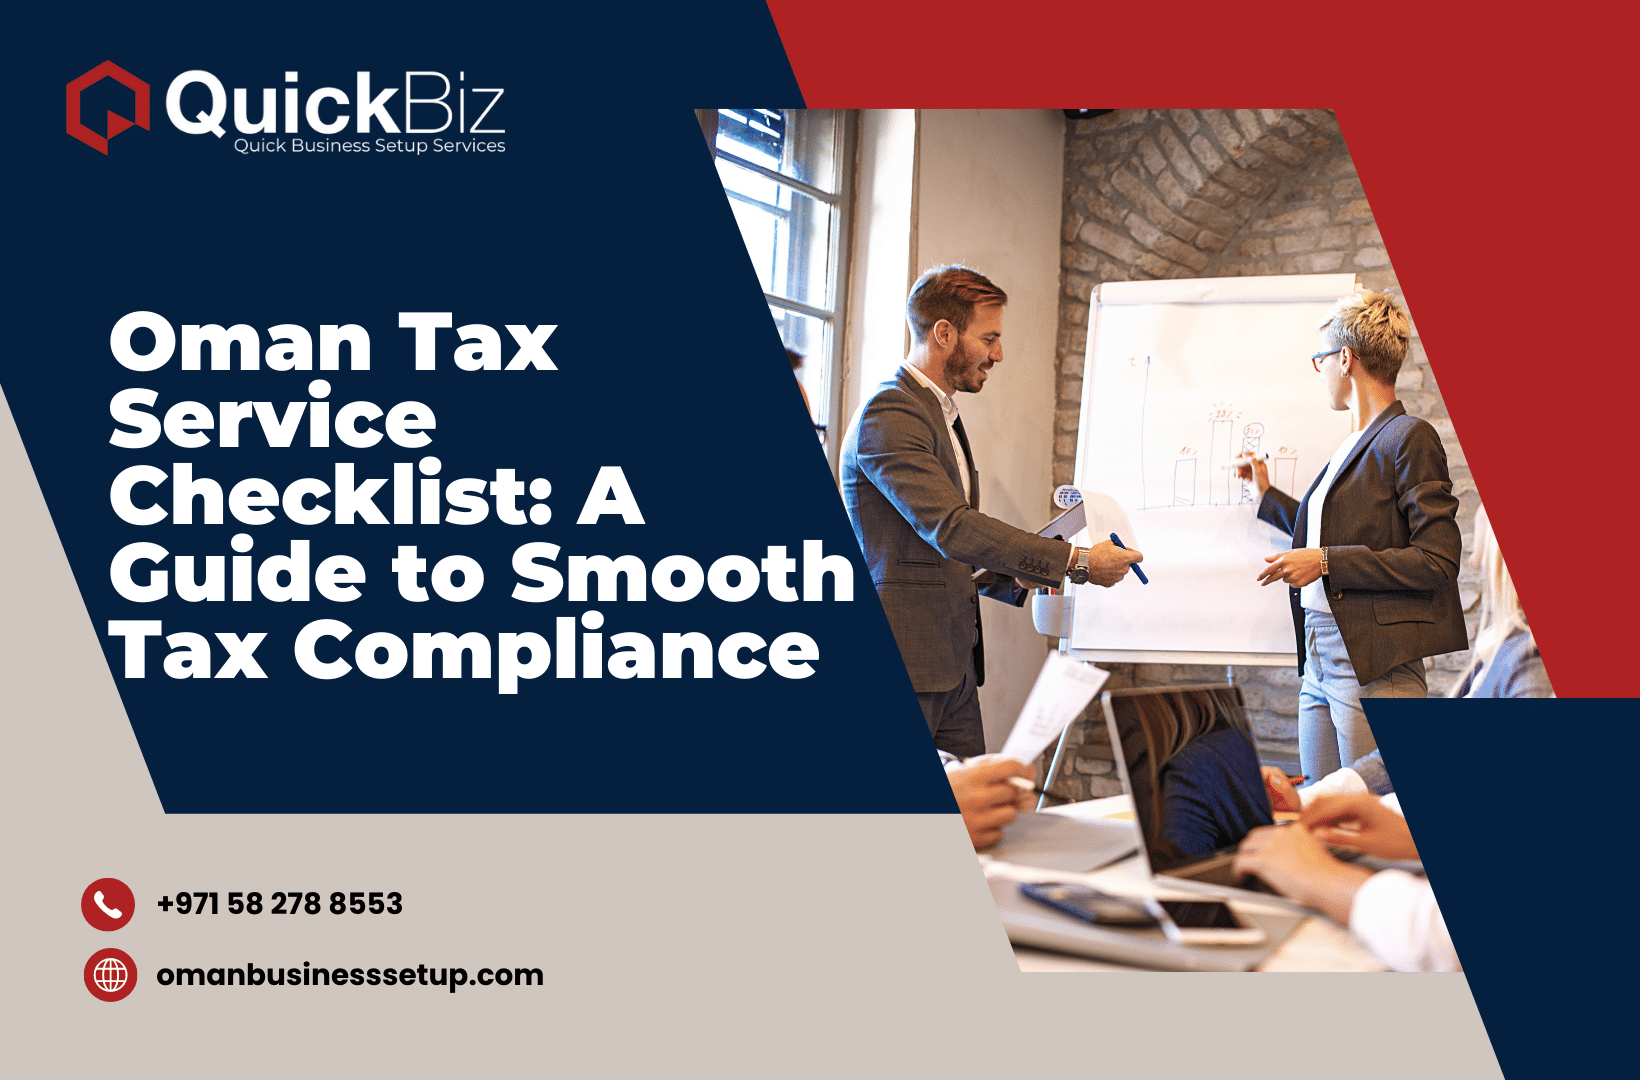 Oman Tax Service Checklist A Guide to Smooth Tax Compliance